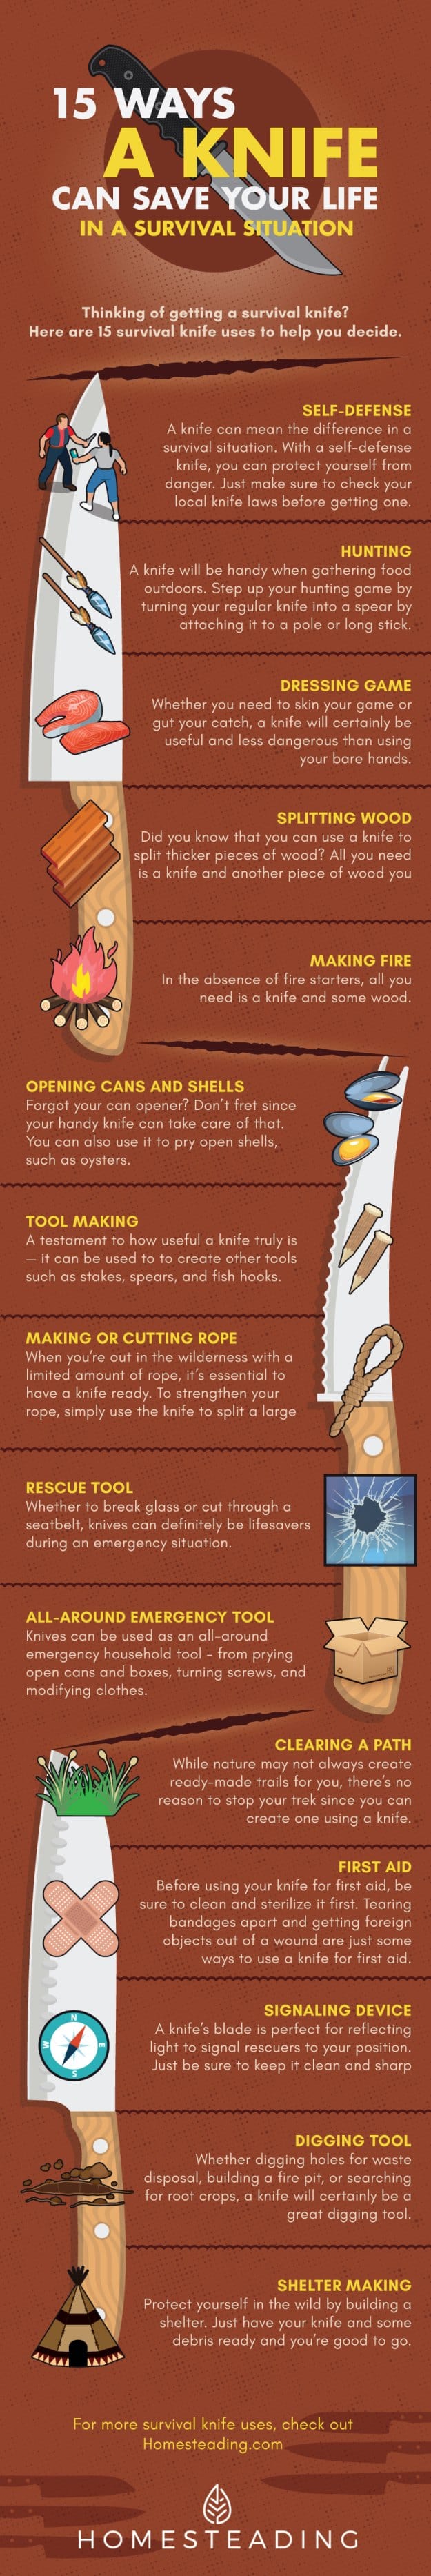 15 Ways A Knife Can Save Your Life In A Survival Situation